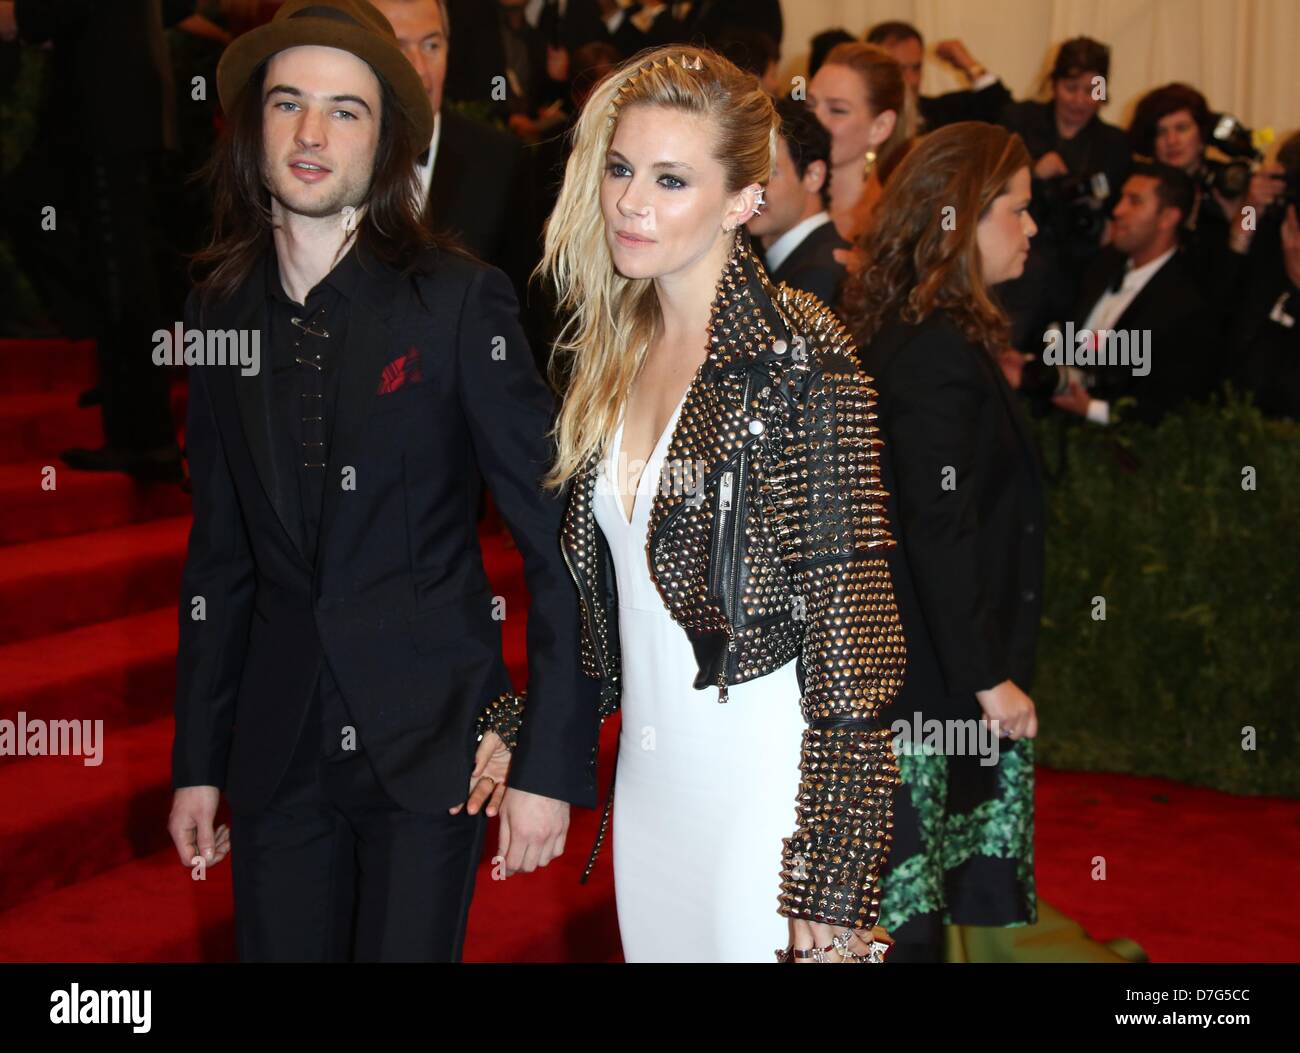 Actors Sienna Miller and Tom Sturridge arrive at the Costume Institute Gala for the 'Punk: Chaos to Couture' exhibition at the Metropolitan Museum of Art in New York City, USA, on 06 May 2013. Photo: Luis Garcia Stock Photo